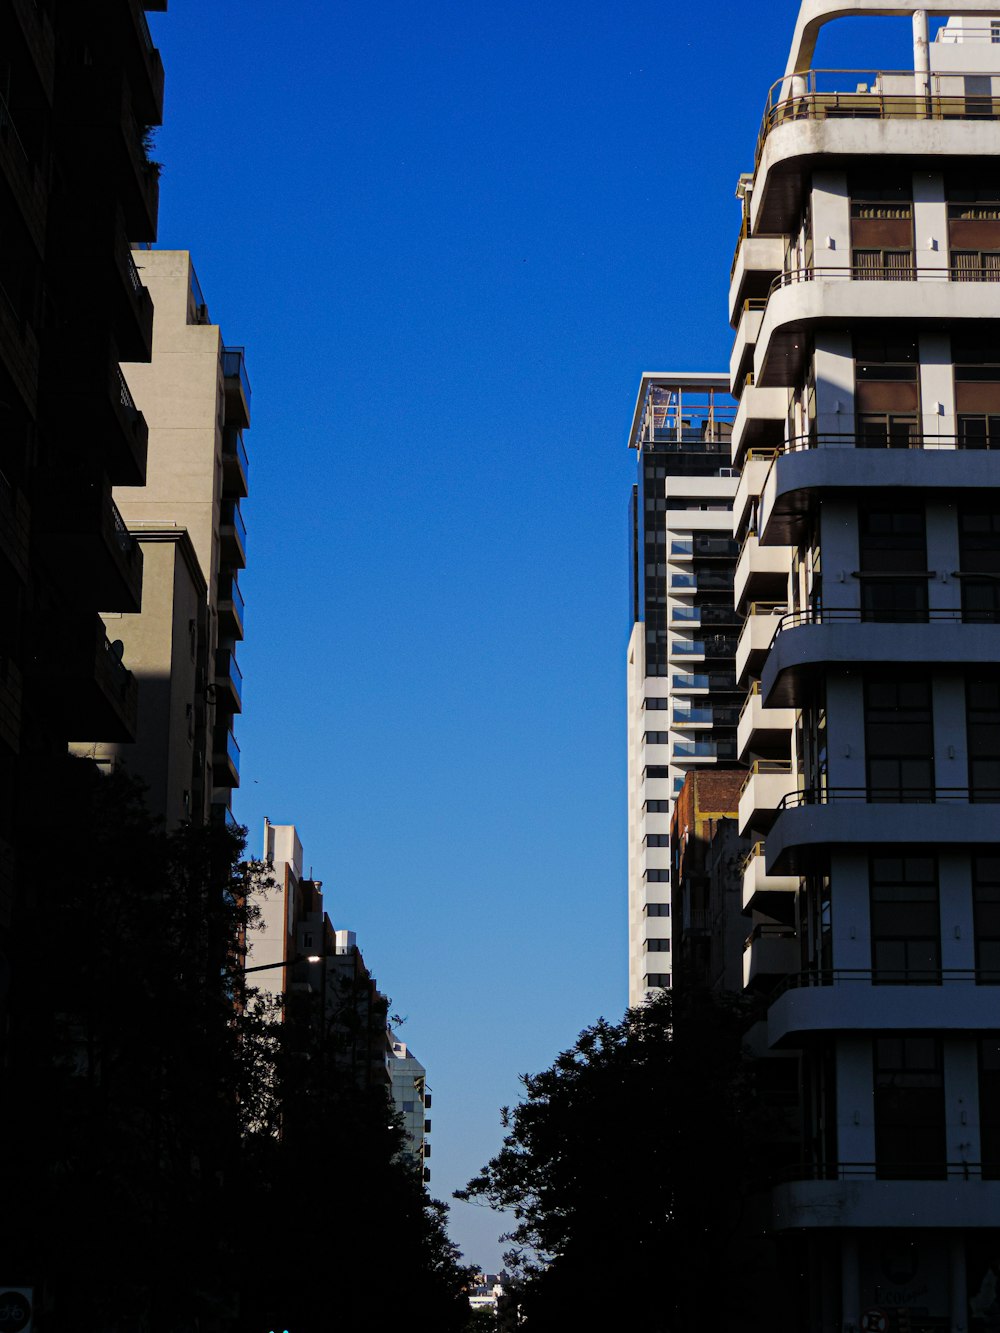 a city street with tall buildings and a blue sky